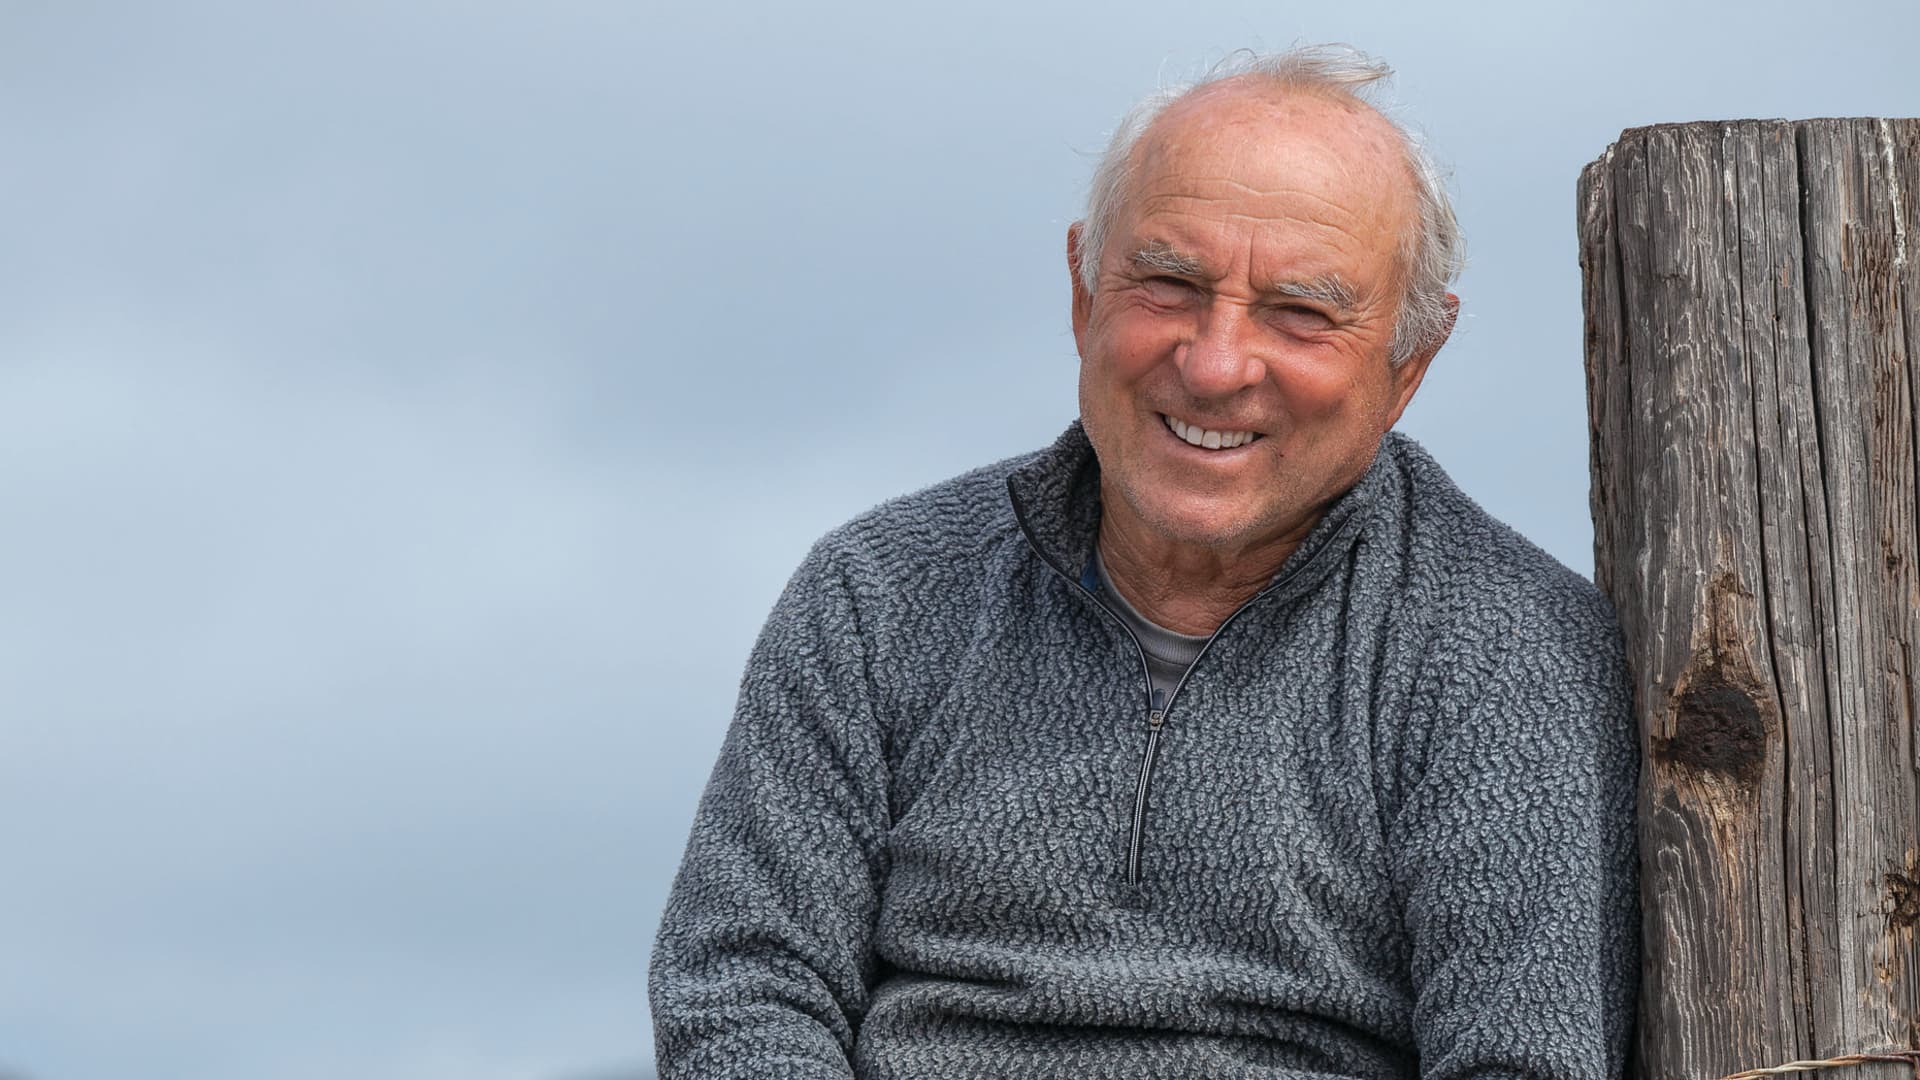 Yvon Chouinard, founder and owner of Patagonia.